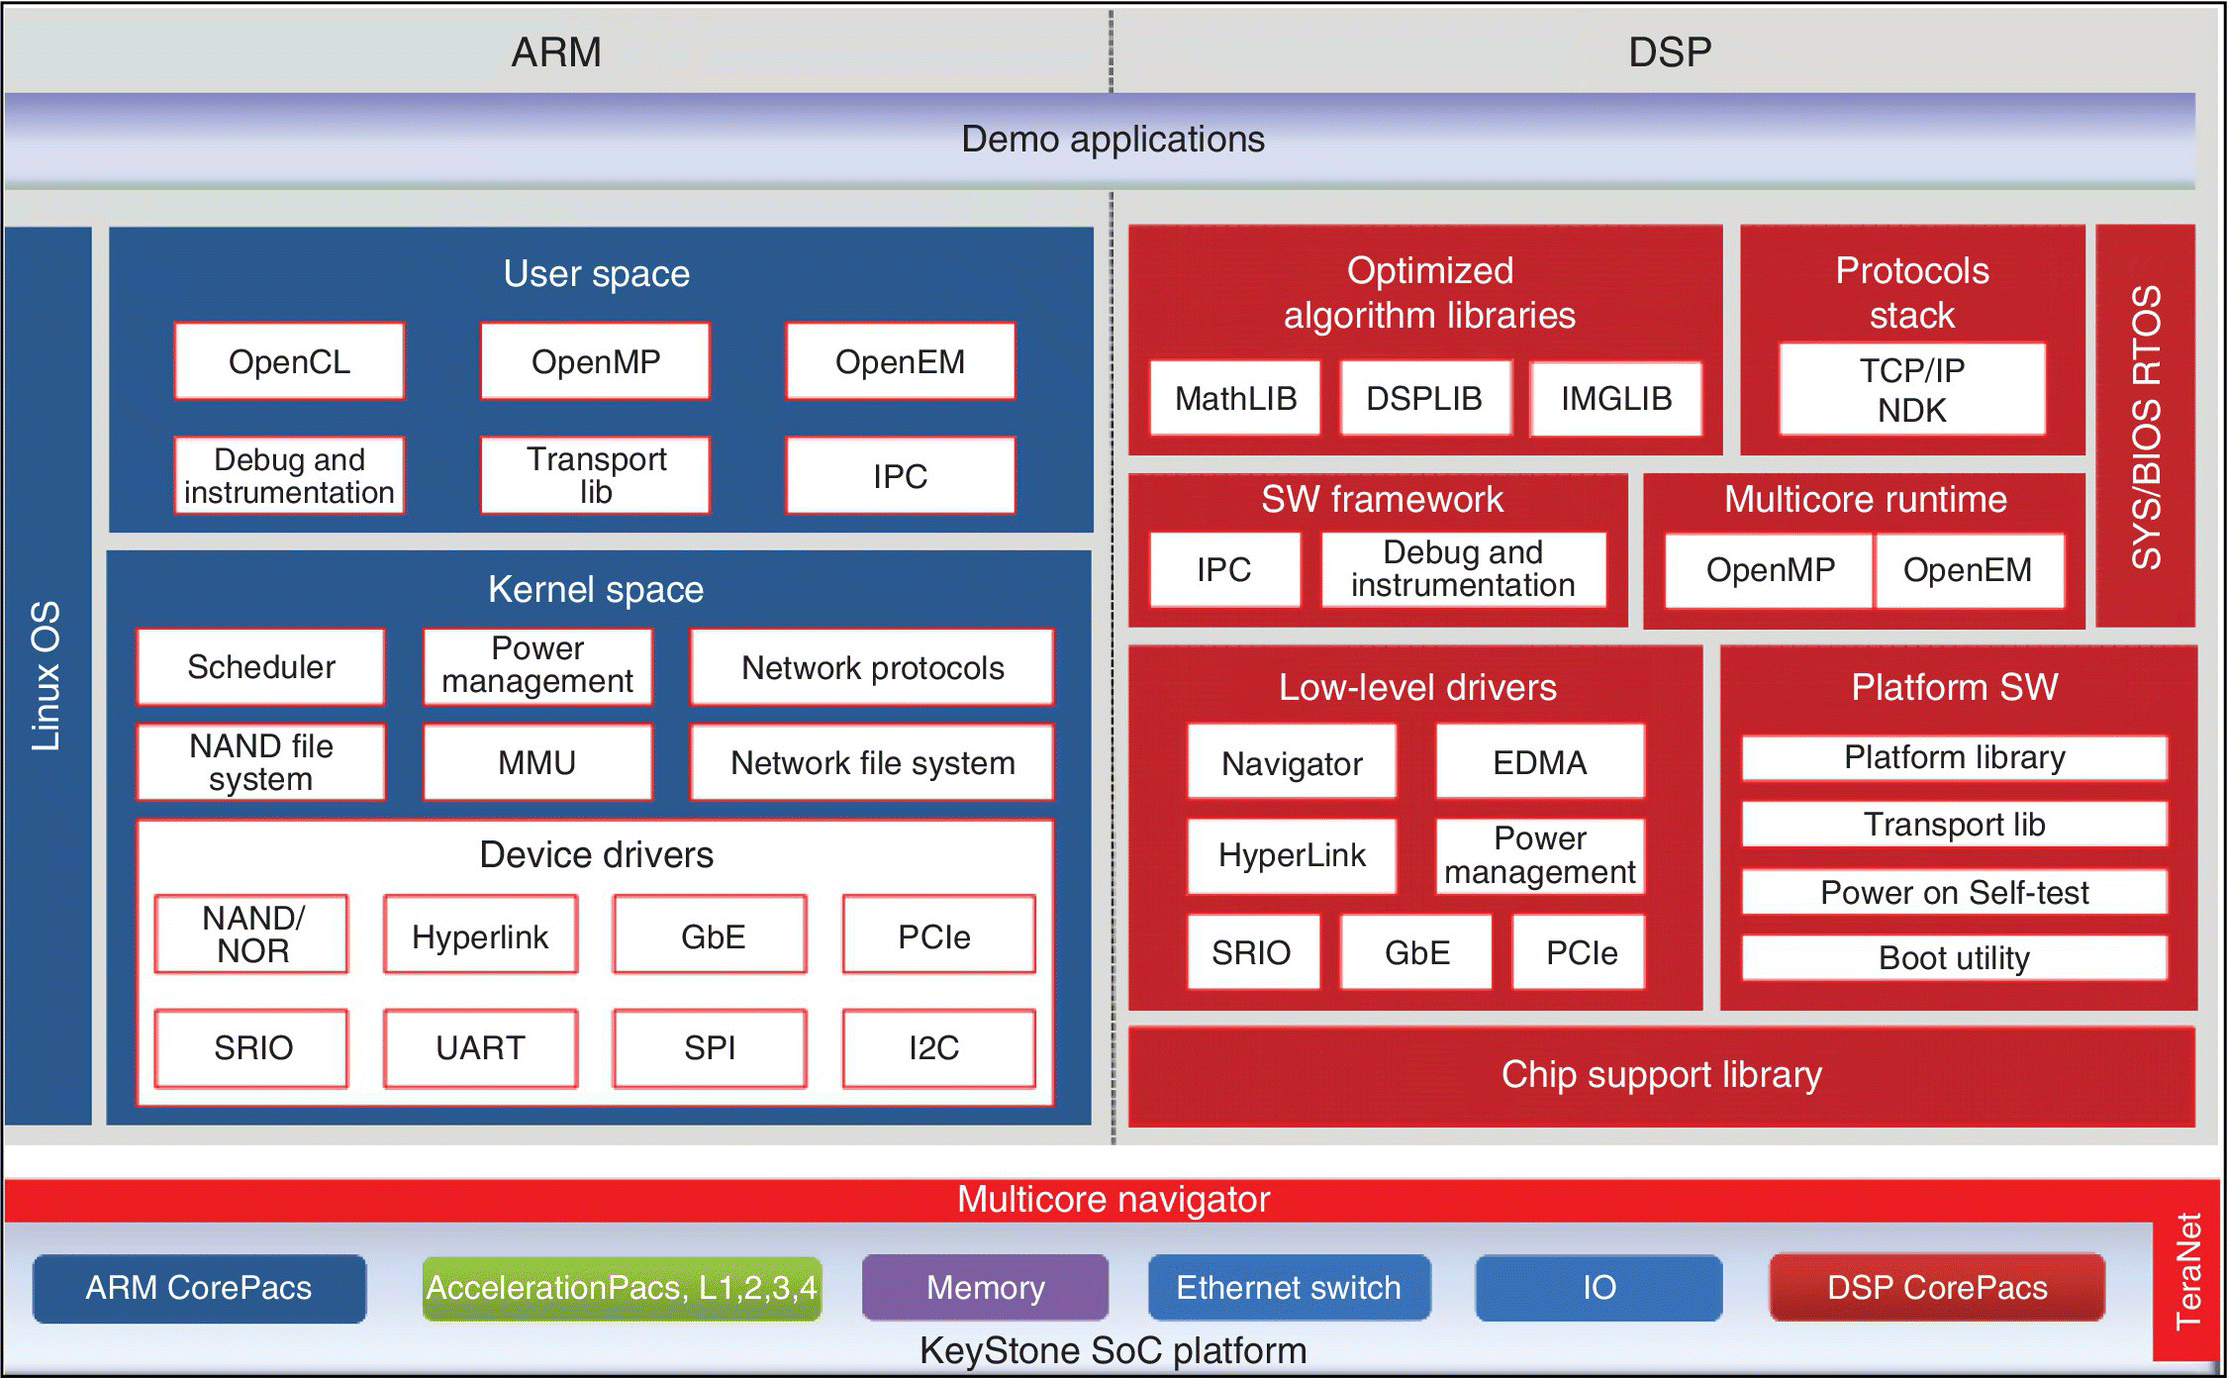 Multicore Software Development Kit (MCSDK) with 2 phases labeled ARM (left) and DSP (right), depicting user space, kernel space, protocols stack, platform SW, chip support library, and multicore navigator etc.